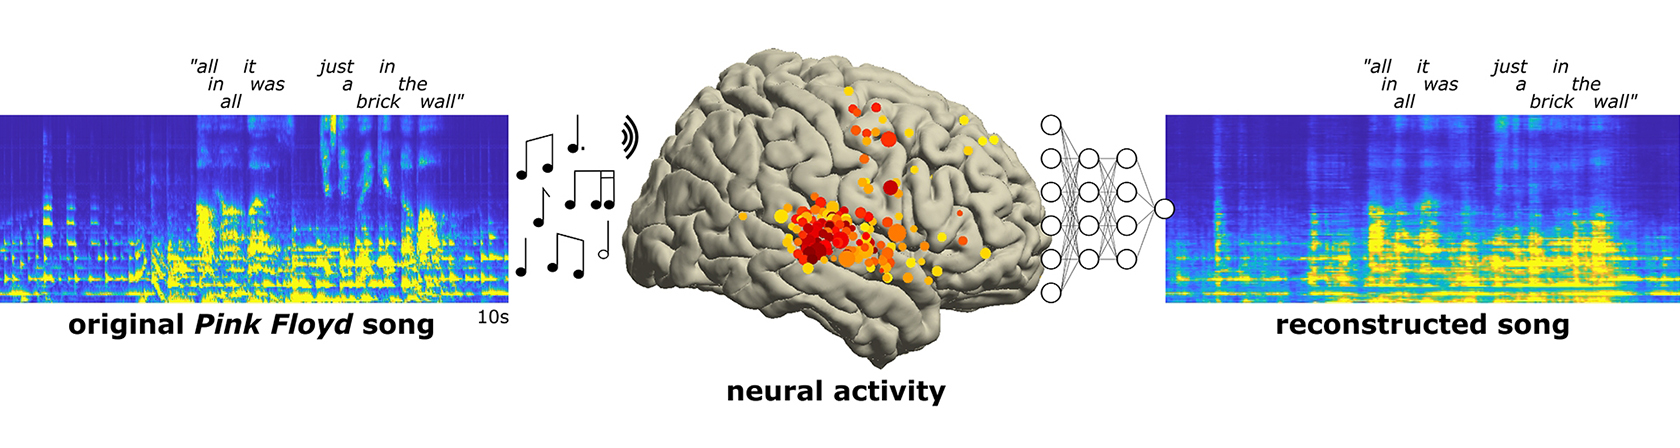 Visualizations of music input, output and brain areas activated